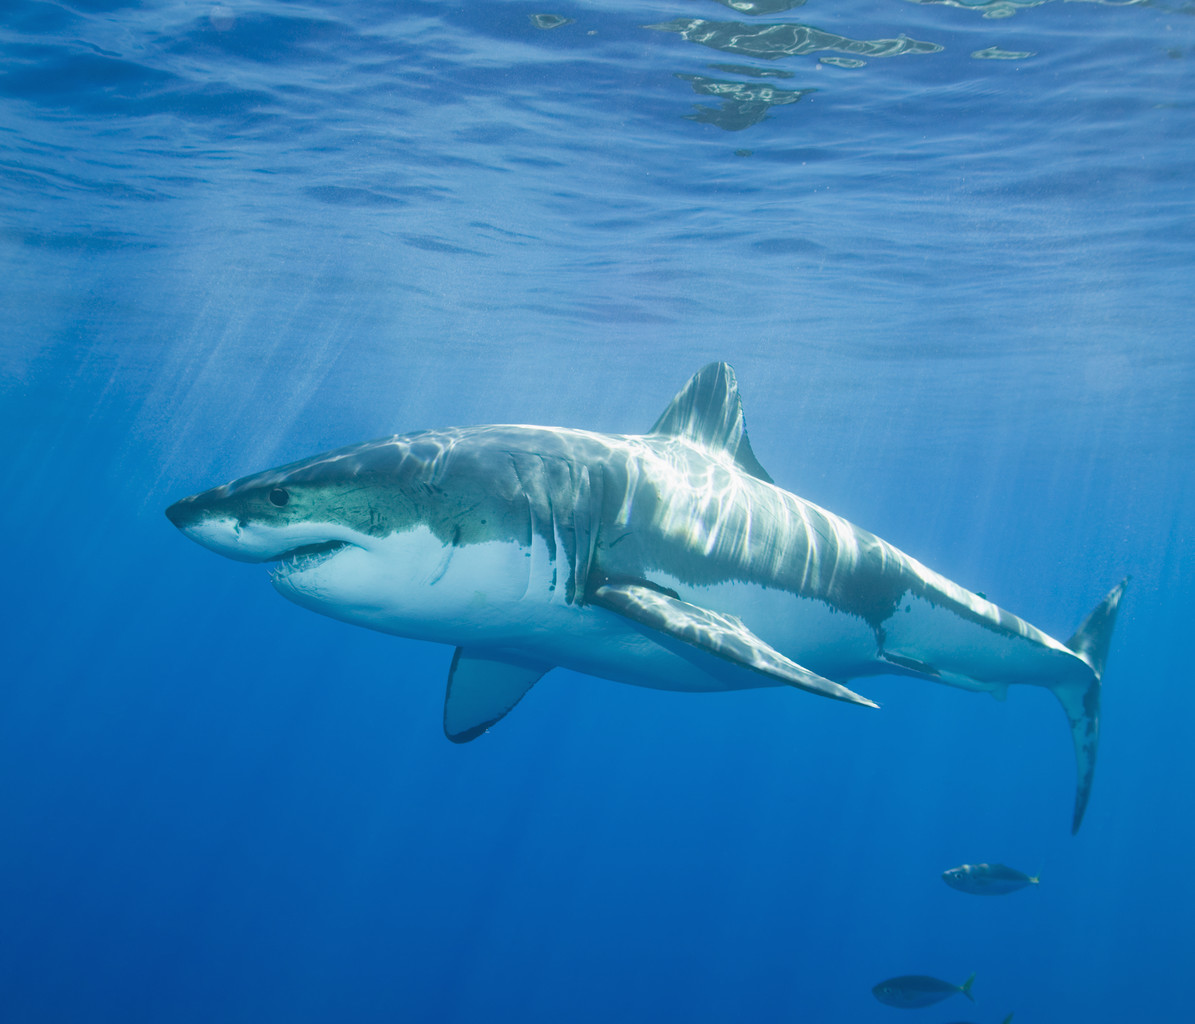  2004 Mexico Great White Shark Image by Royalty FreeCorbis 1195x1024